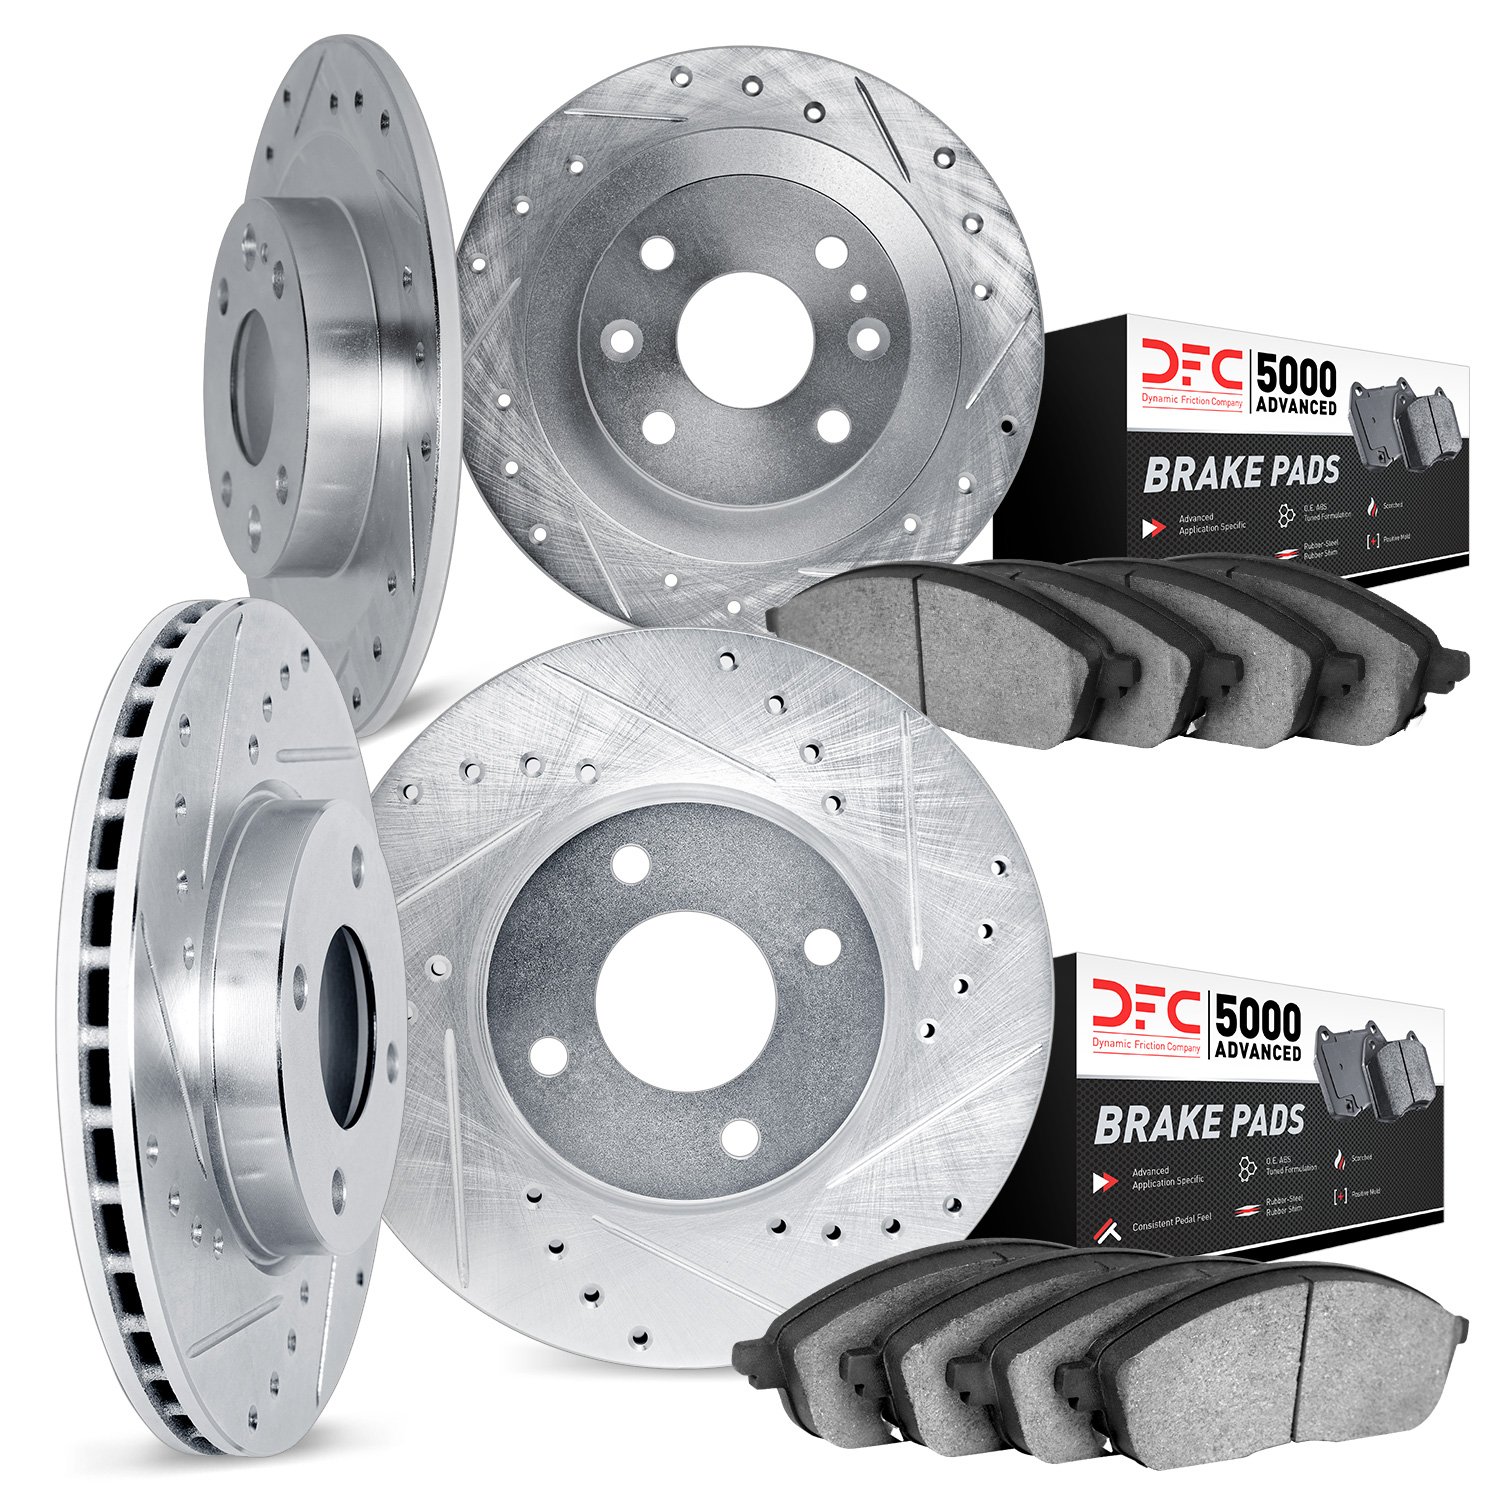 7504-28004 Drilled/Slotted Brake Rotors w/5000 Advanced Brake Pads Kit [Silver], 1977-1986 Peugeot, Position: Front and Rear